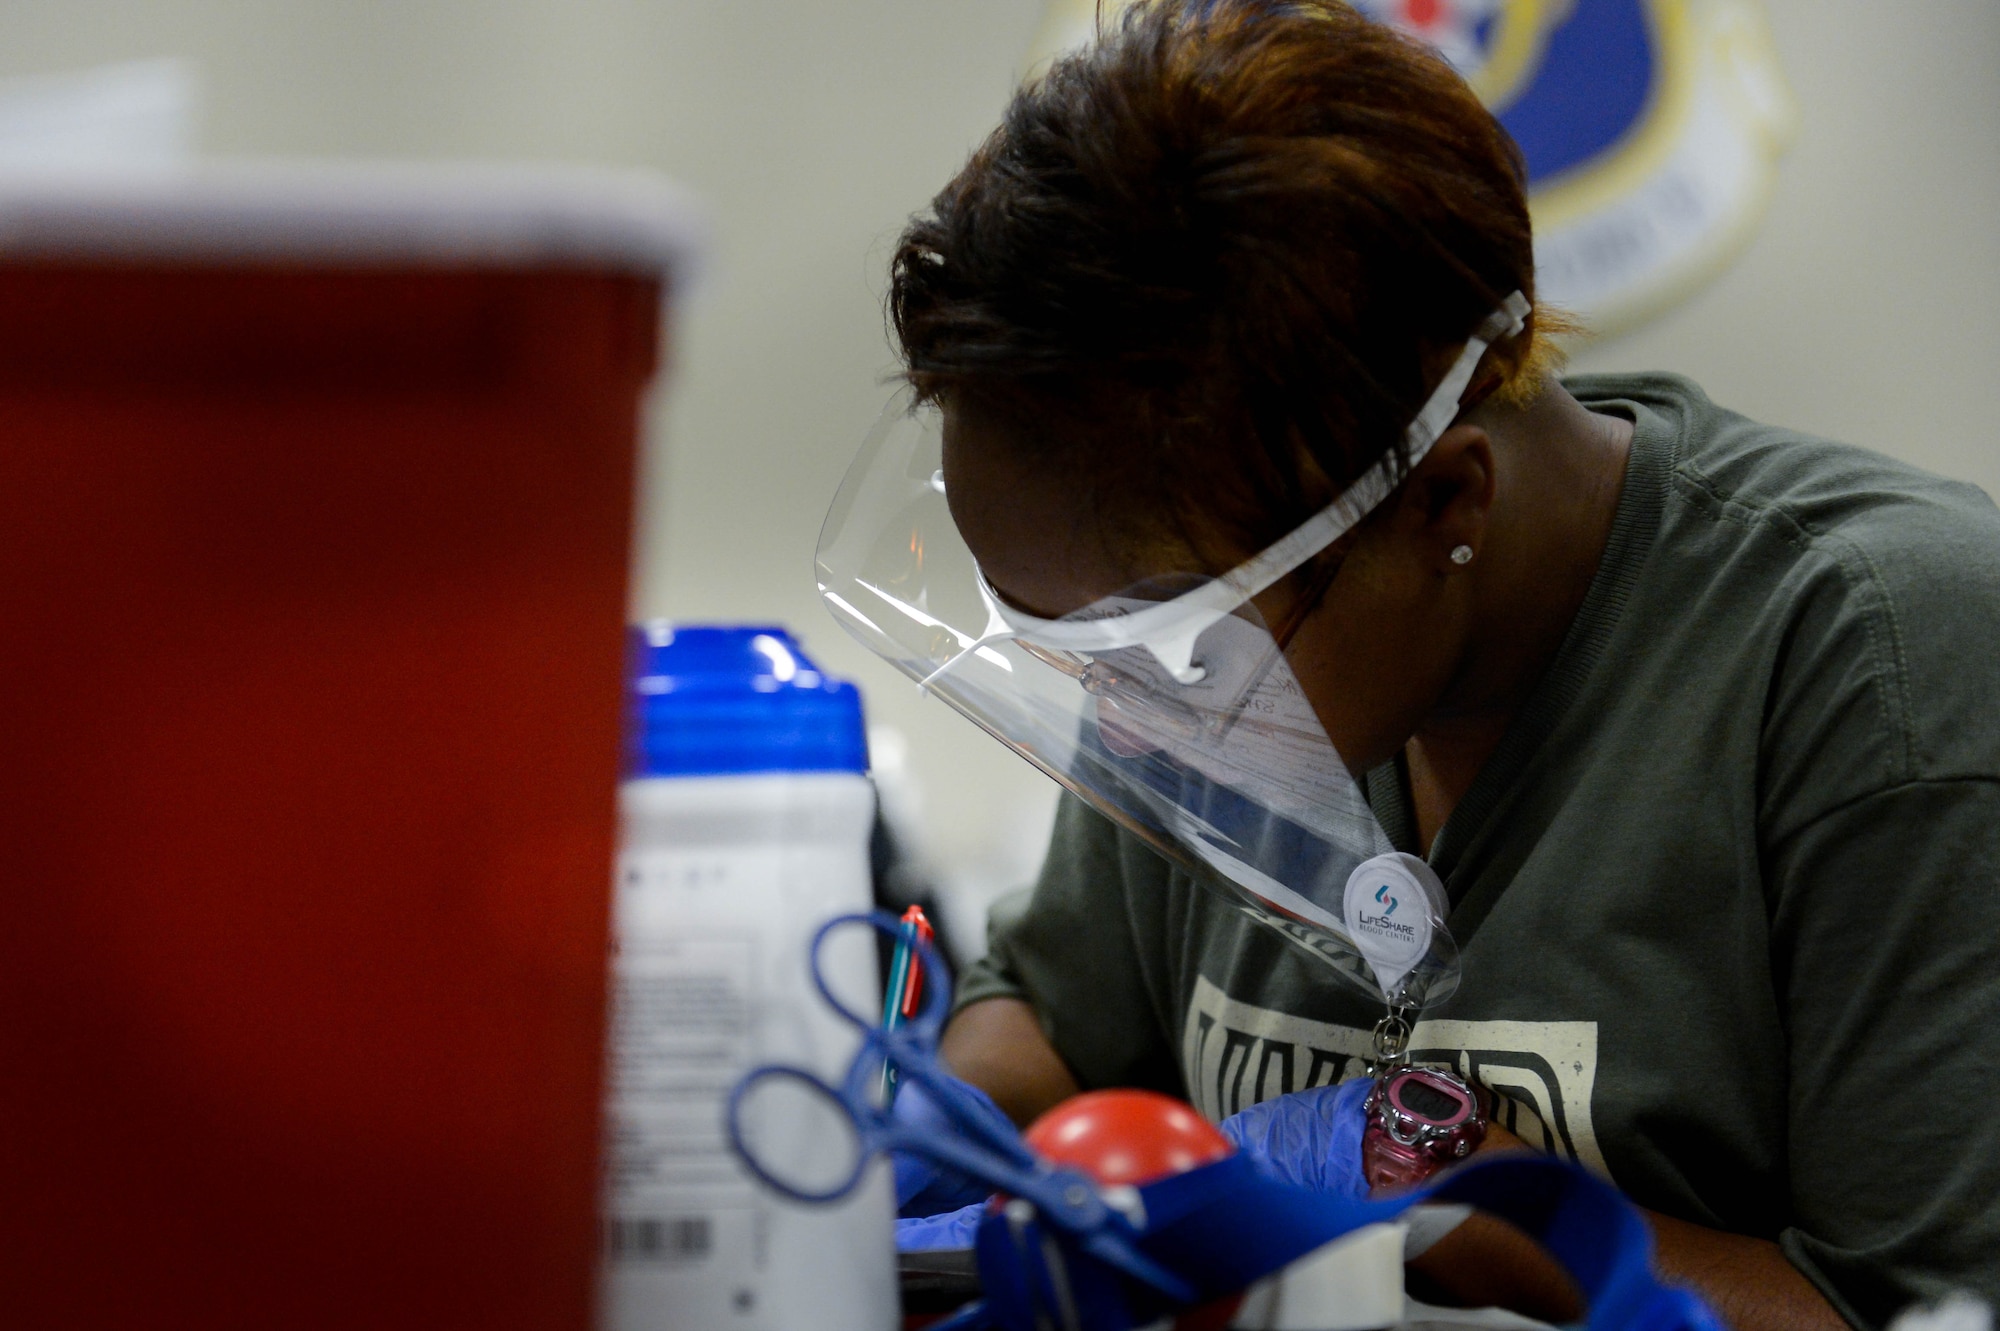 A LifeShare technician fills out paperwork at the 2017 LifeShare Blood Drive at Barksdale Air Force Base, La., June 16, 2017. One pint of donated blood can help up to three people. (U.S. Air Force Photo/Airman 1st Class Sydney Bennett)